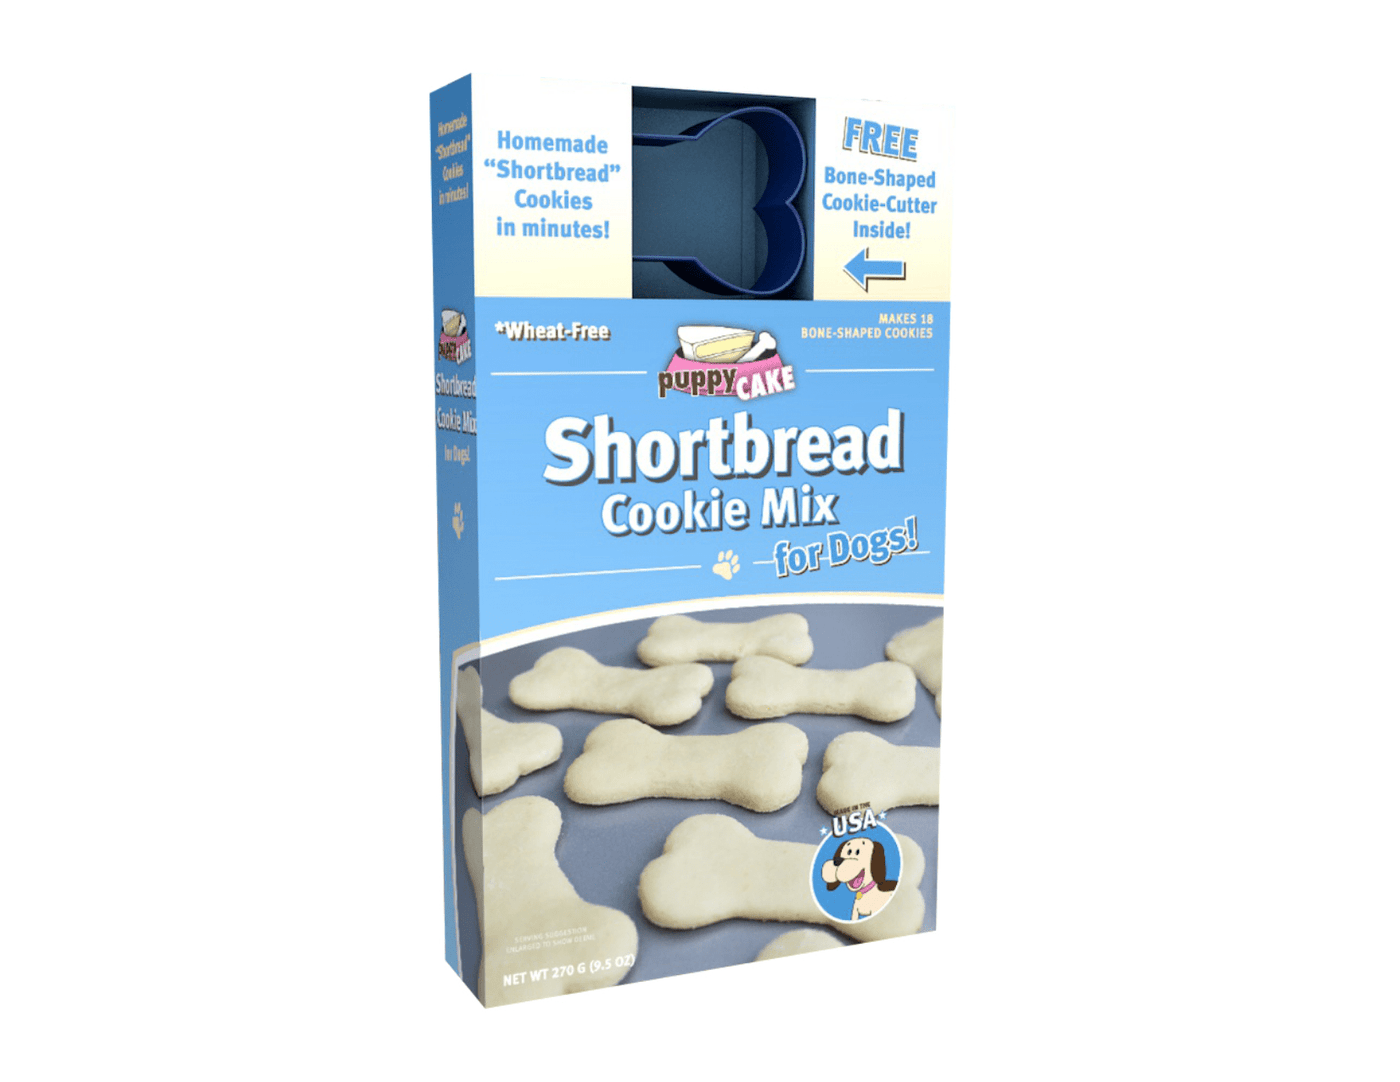 Shortbread Cookie Mix and Cookie Cutter (wheat-free)